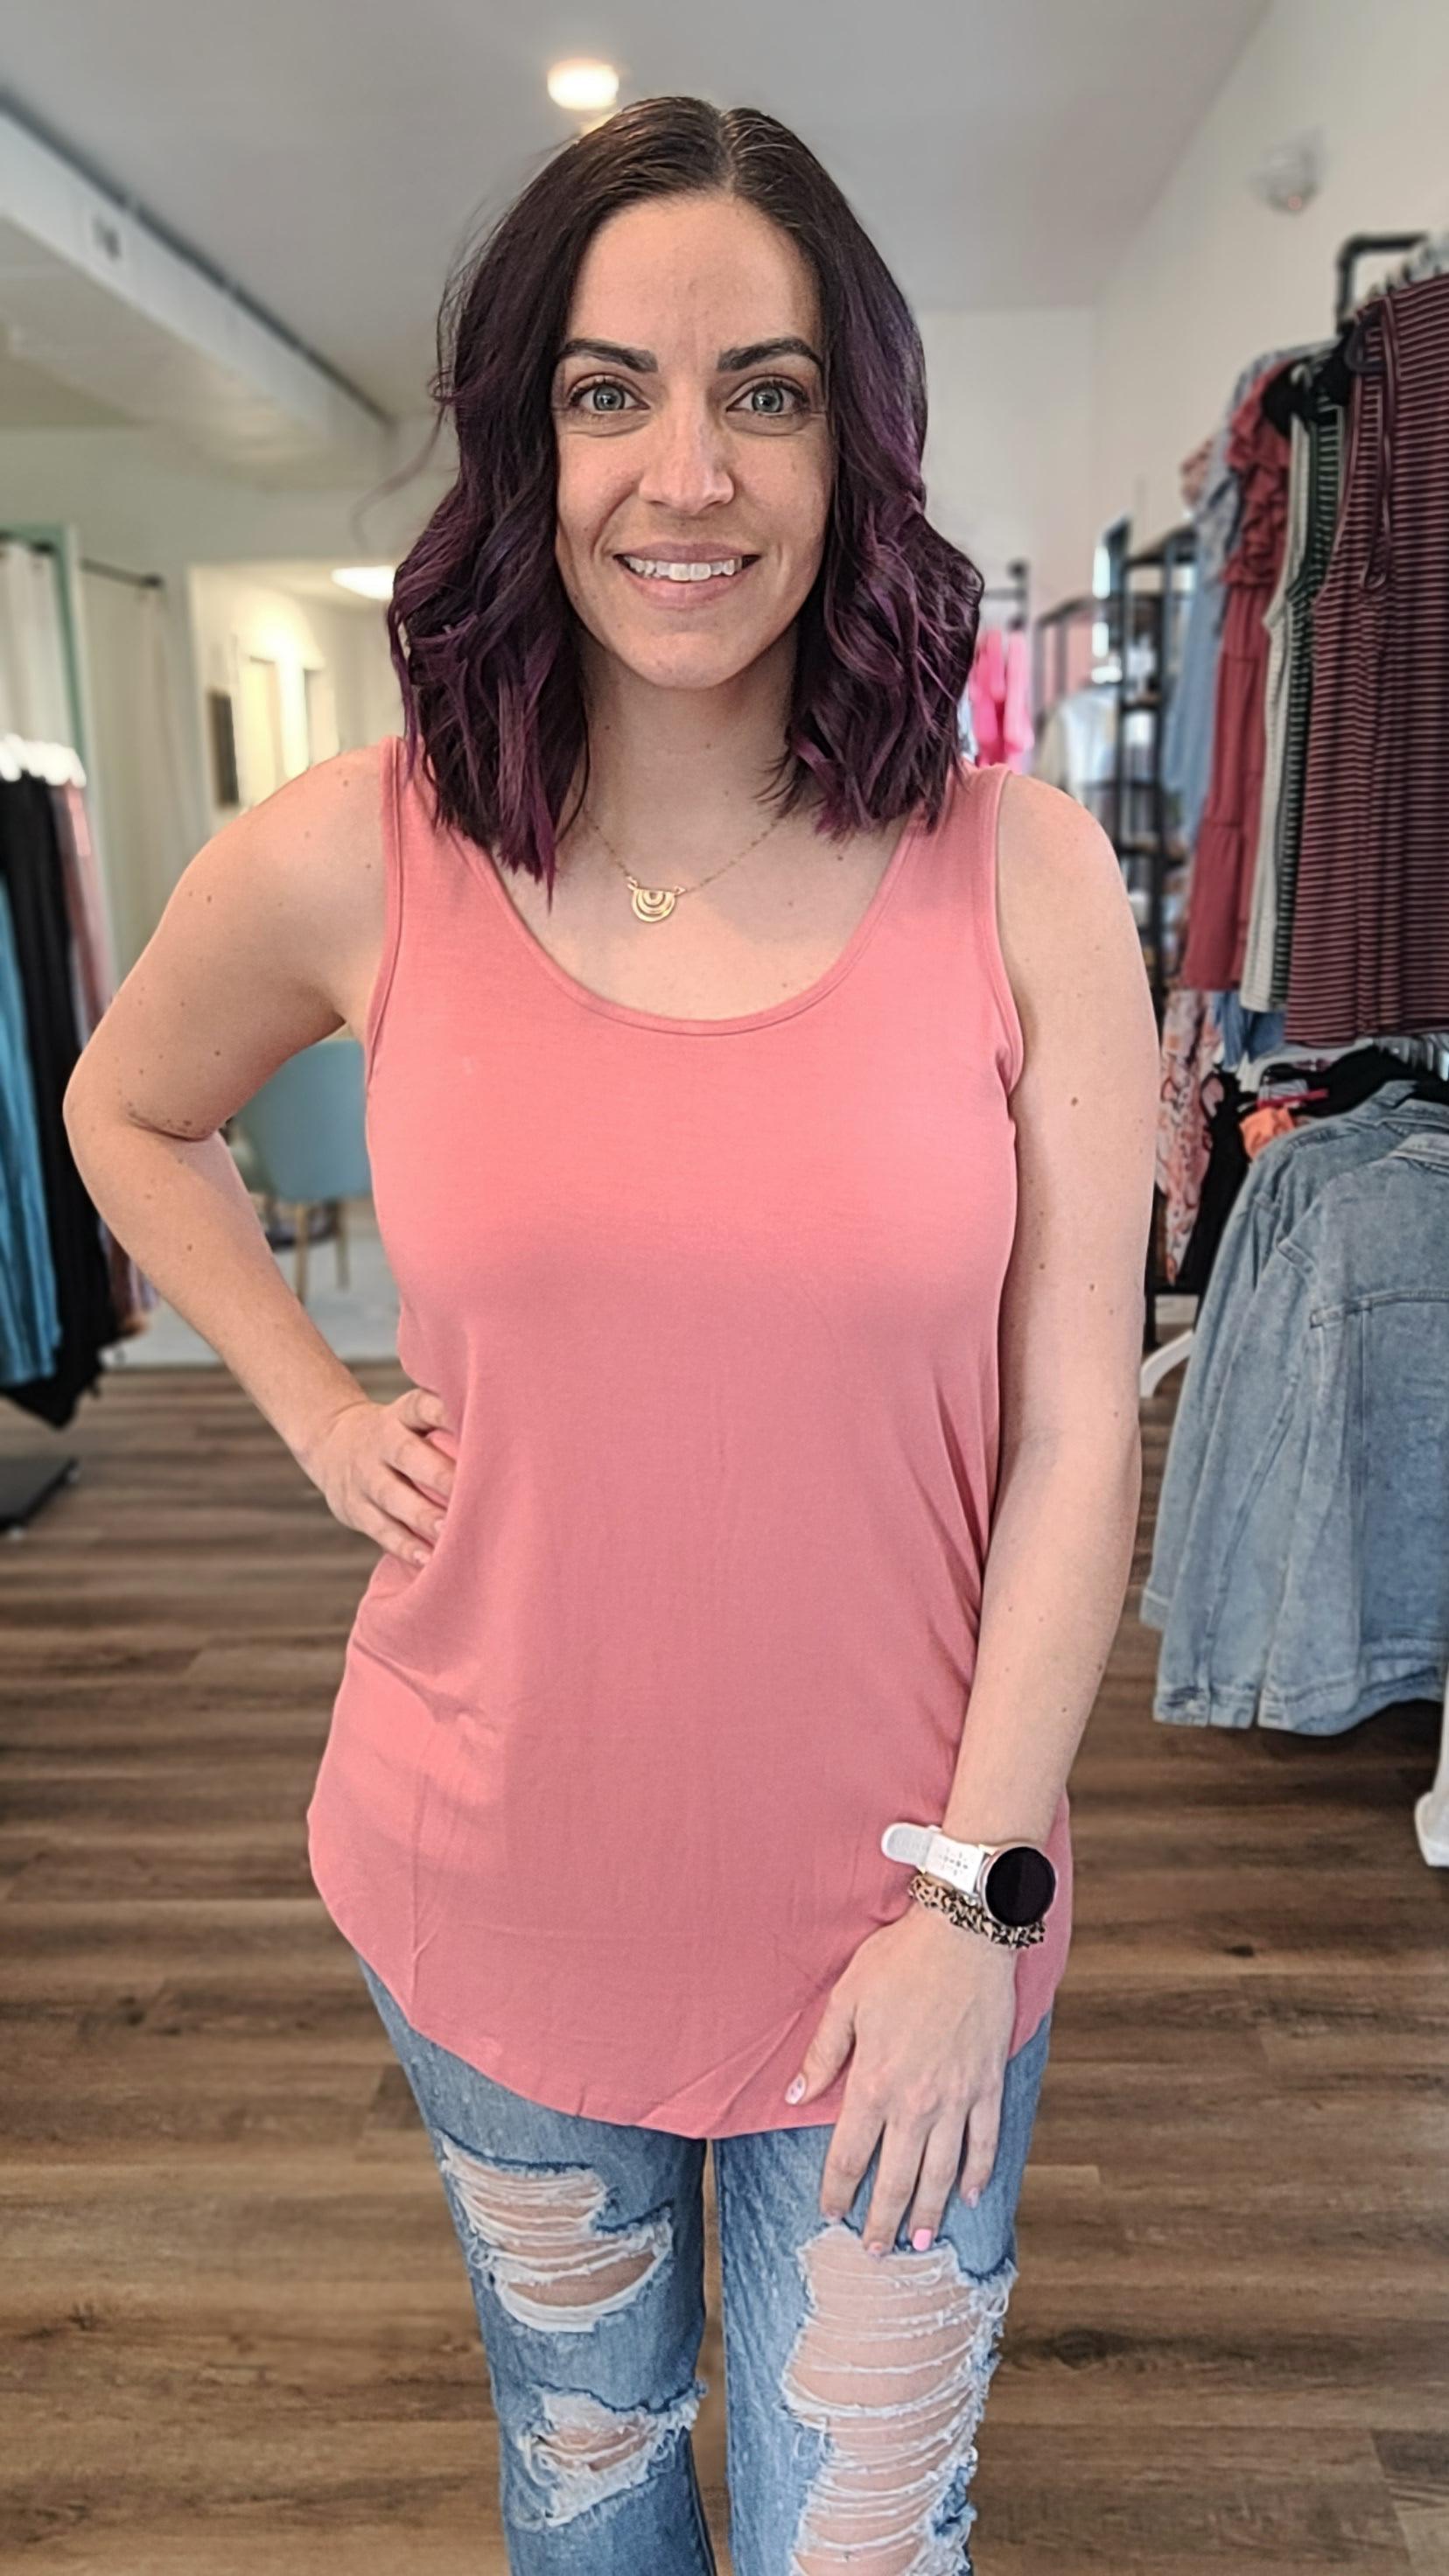 Shop Willow Tank Top-Shirts & Tops at Ruby Joy Boutique, a Women's Clothing Store in Pickerington, Ohio